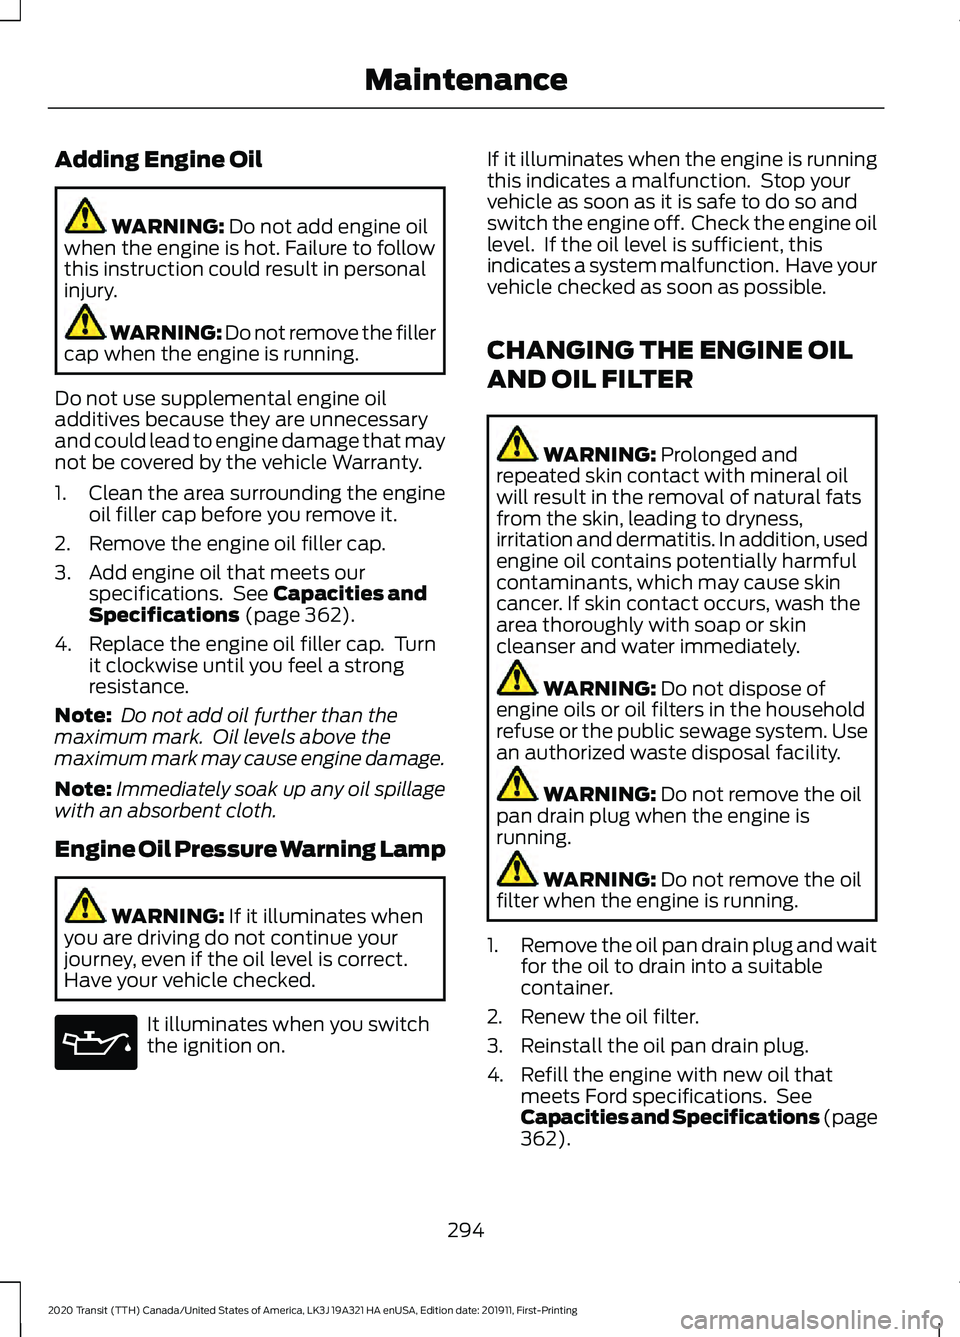 FORD TRANSIT 2020  Owners Manual Adding Engine Oil
WARNING: Do not add engine oil
when the engine is hot. Failure to follow
this instruction could result in personal
injury. WARNING: Do not remove the filler
cap when the engine is ru